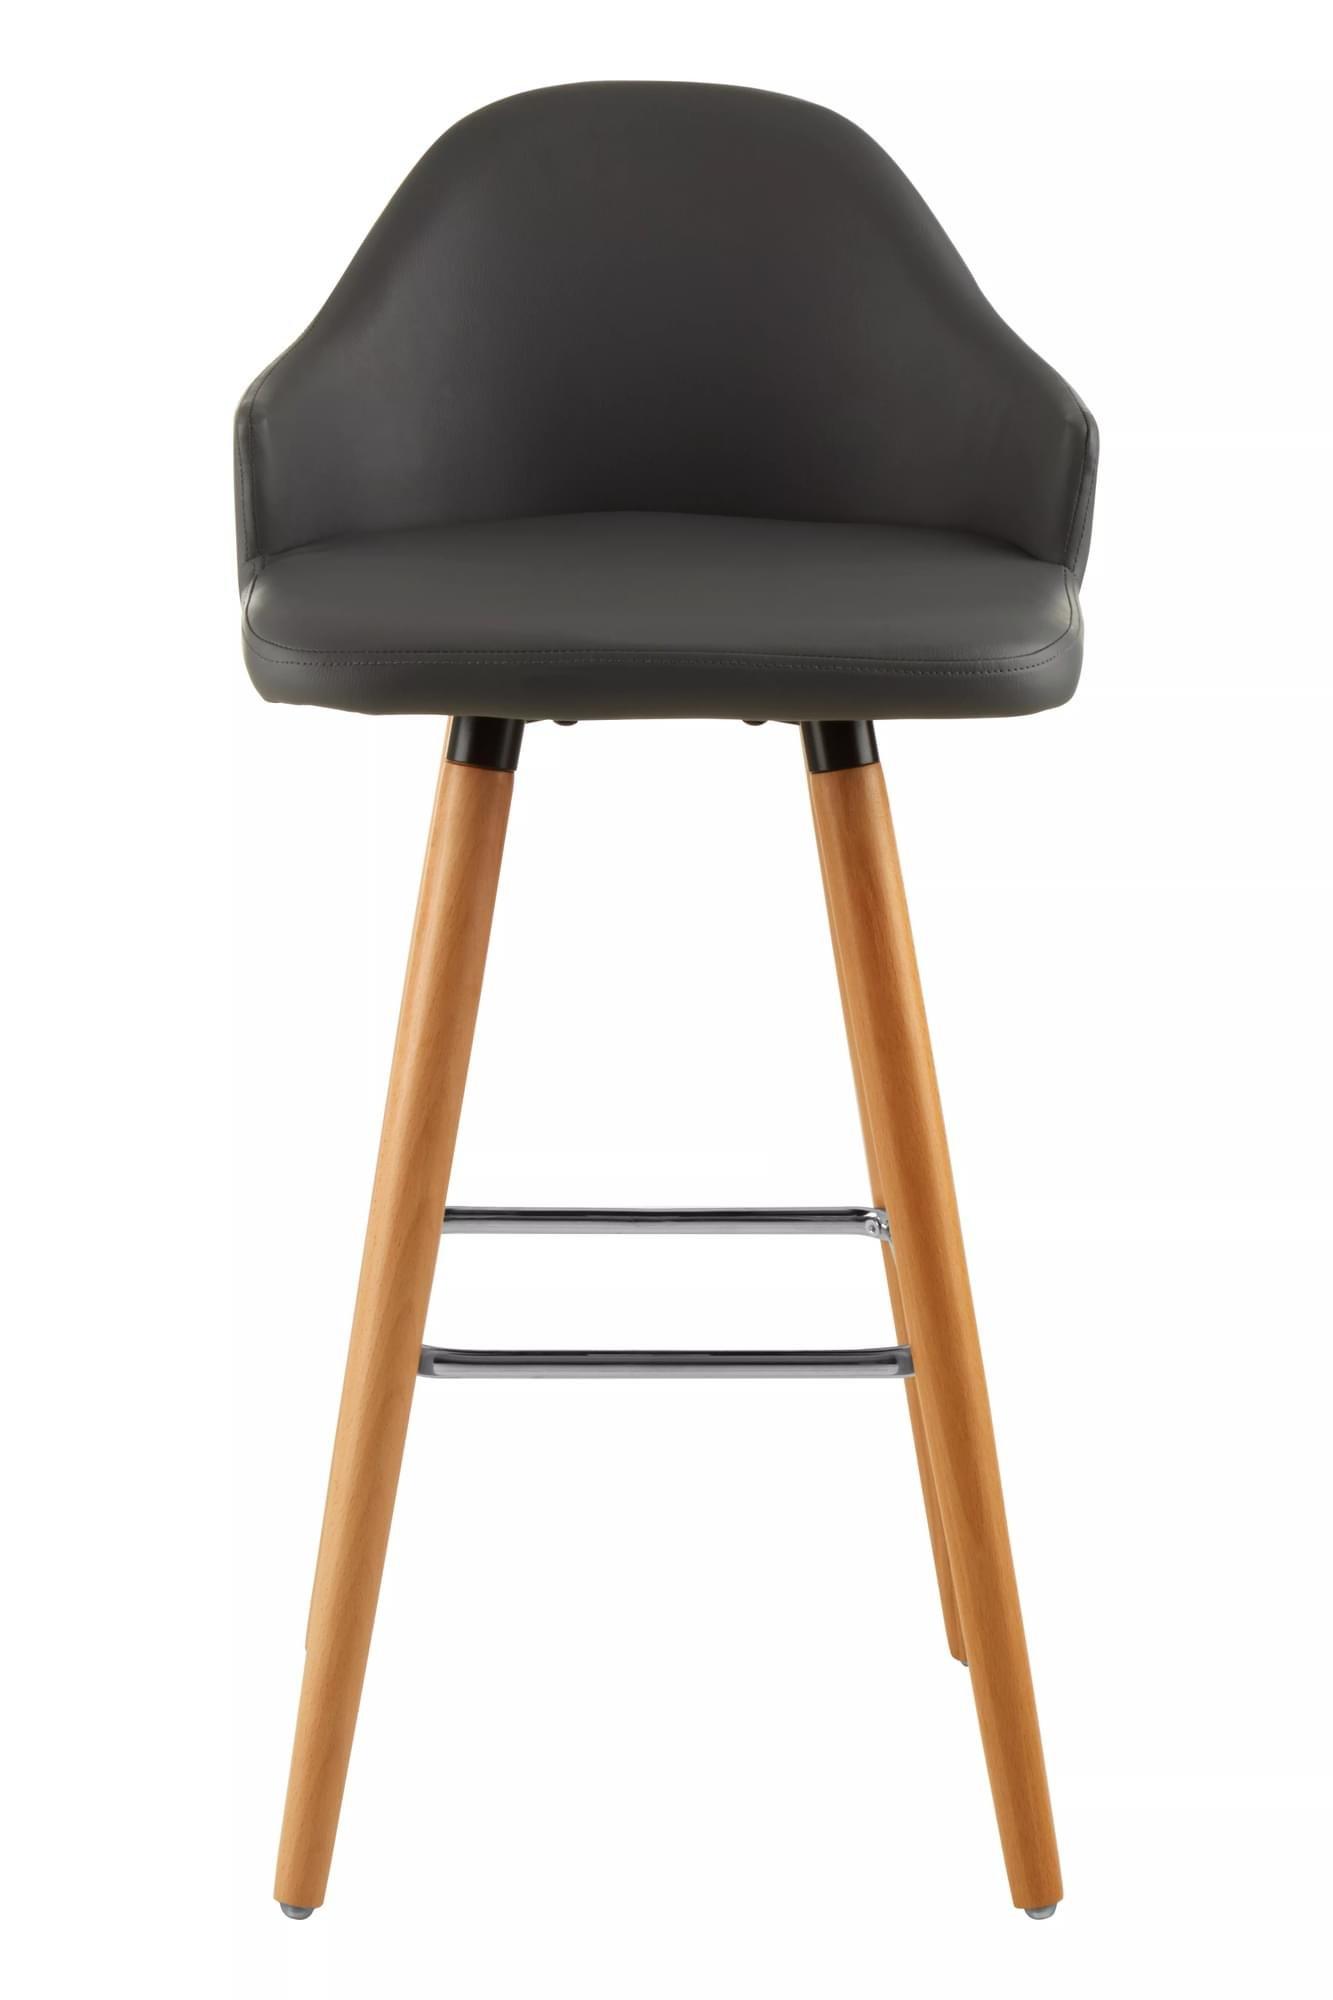 Interiors by Premier Black Curved Backrest Bar Stool, Comfortable Seating Faux Leather Bar Stool, Ea